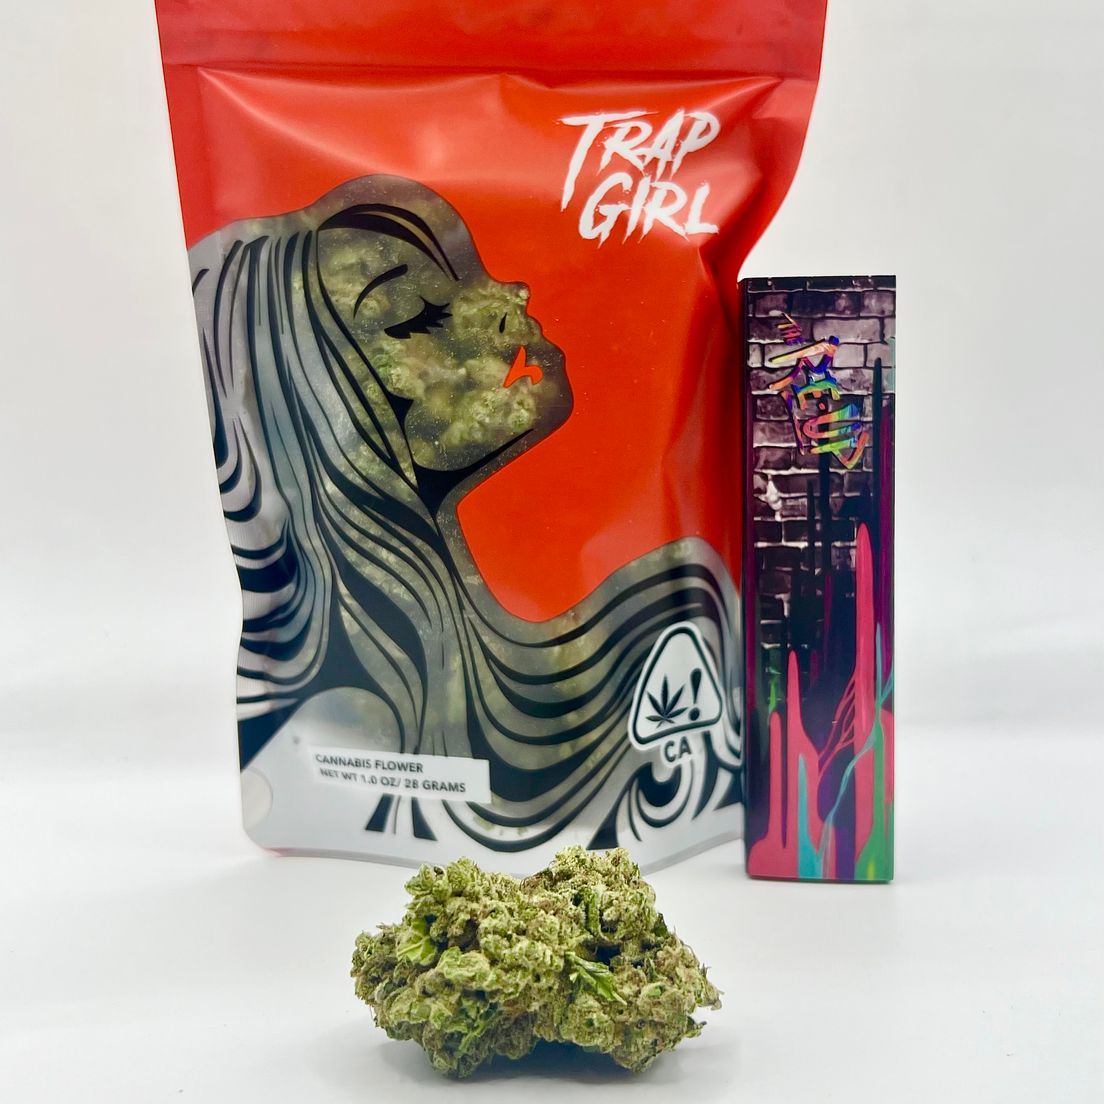 *Deal! $89 1 oz. Rainbow Sherbert (27.61%/Hybrid) - Trap Girl + Rolling Papers *Disclaimer*